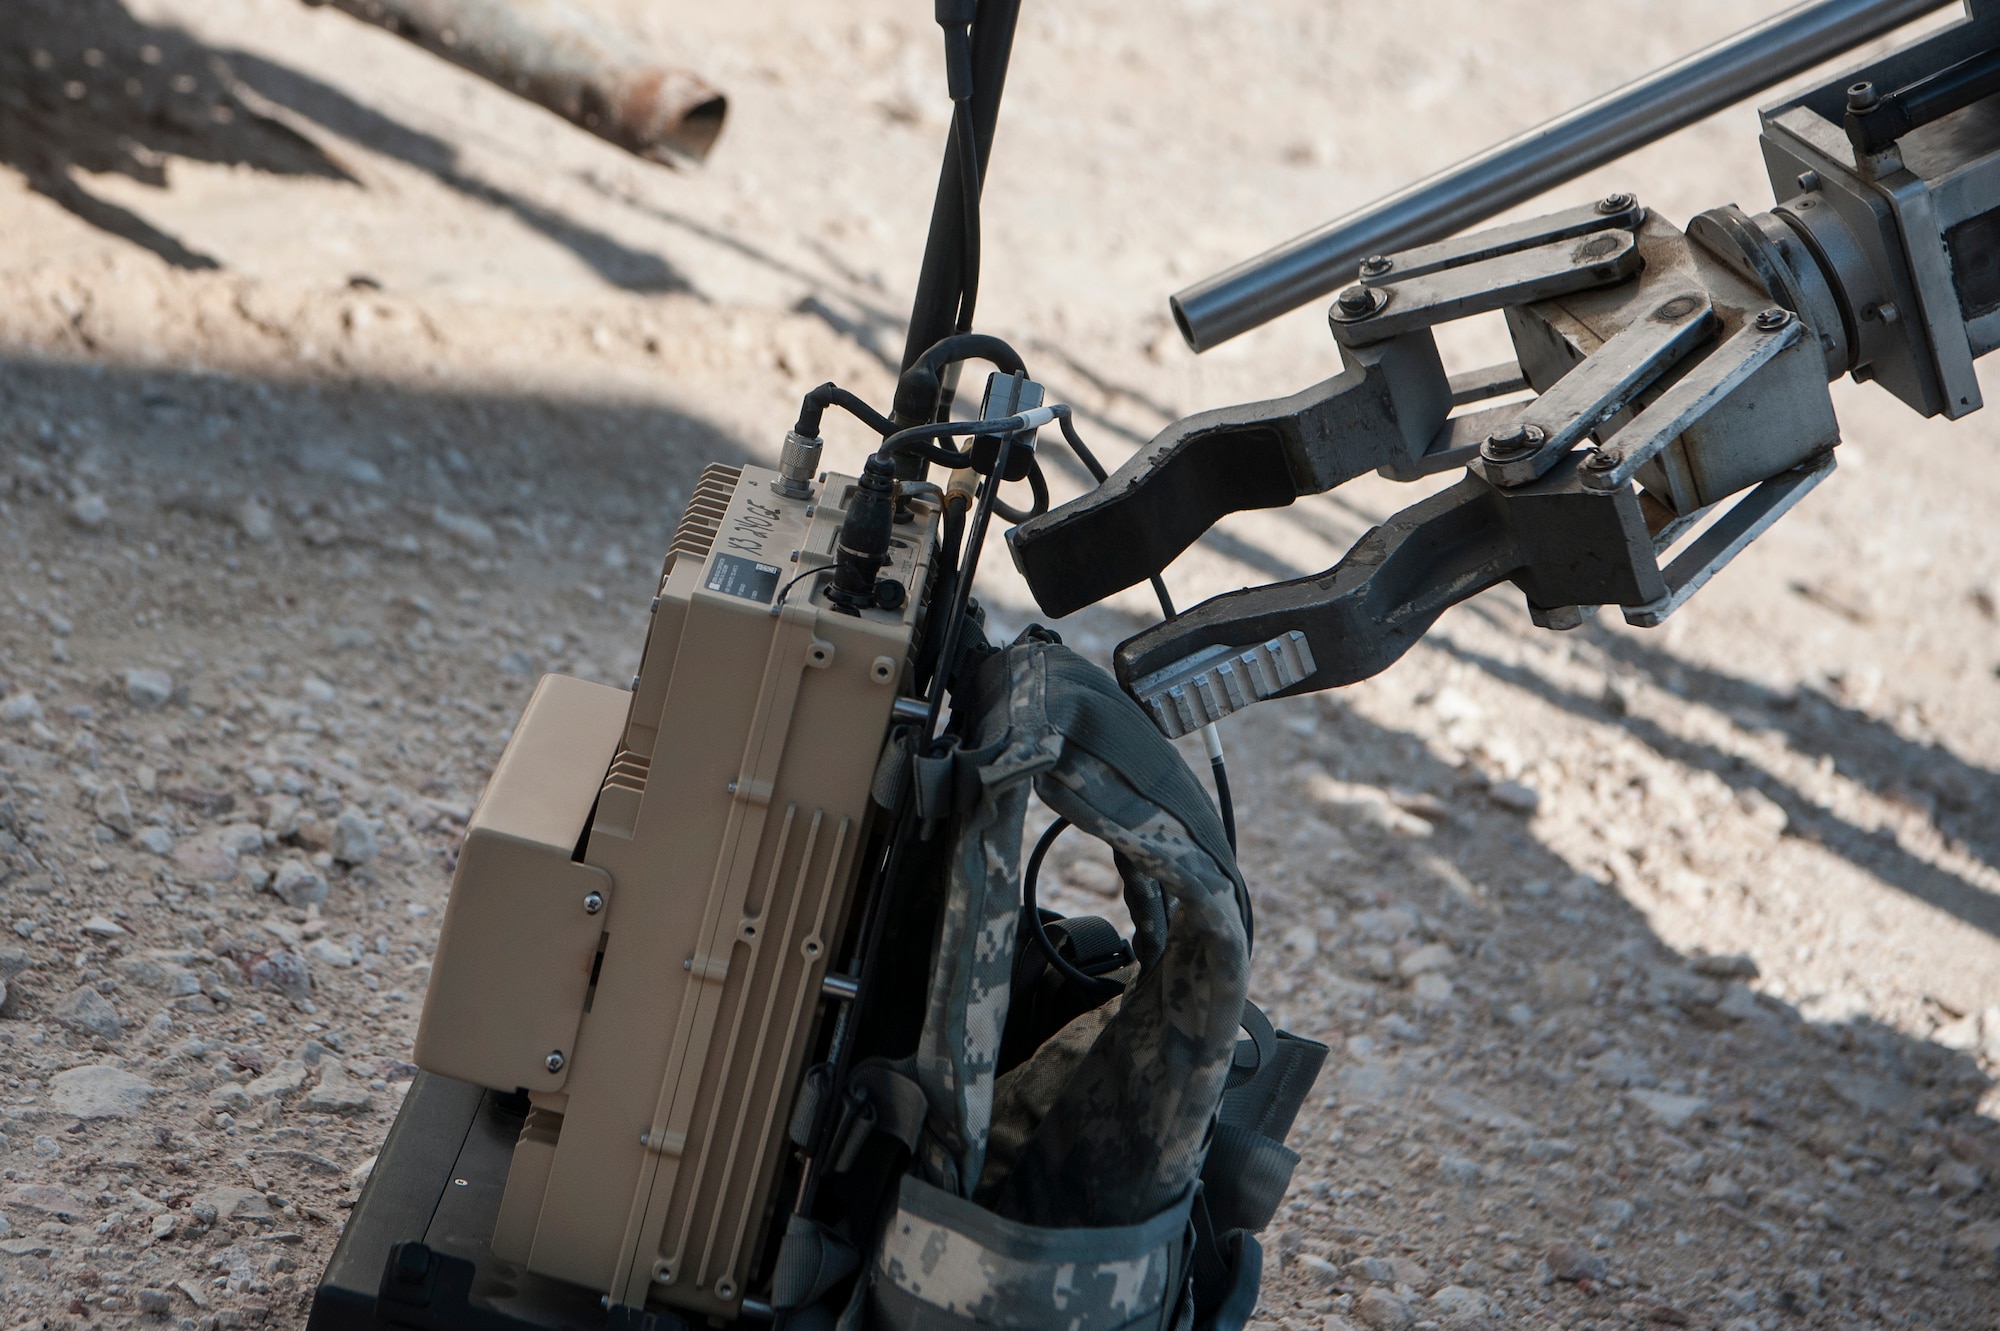 The 379th Expeditionary Civil Engineer Squadron explosive, ordnance, and disposal (EOD) team’s remotely controlled F6A Robotic Platform moves near a simulated vehicle borne improvised explosive device (VBIED) during a VBIED training exercise Dec. 18, 2018, at Al Udeid Air Base, Qatar. Training participants utilized an F6A robotic platform, the bomb suit, and other specific tools to disrupt a VBIED during the exercise. (U.S. Air Force photo by Tech. Sgt. Christopher Hubenthal)